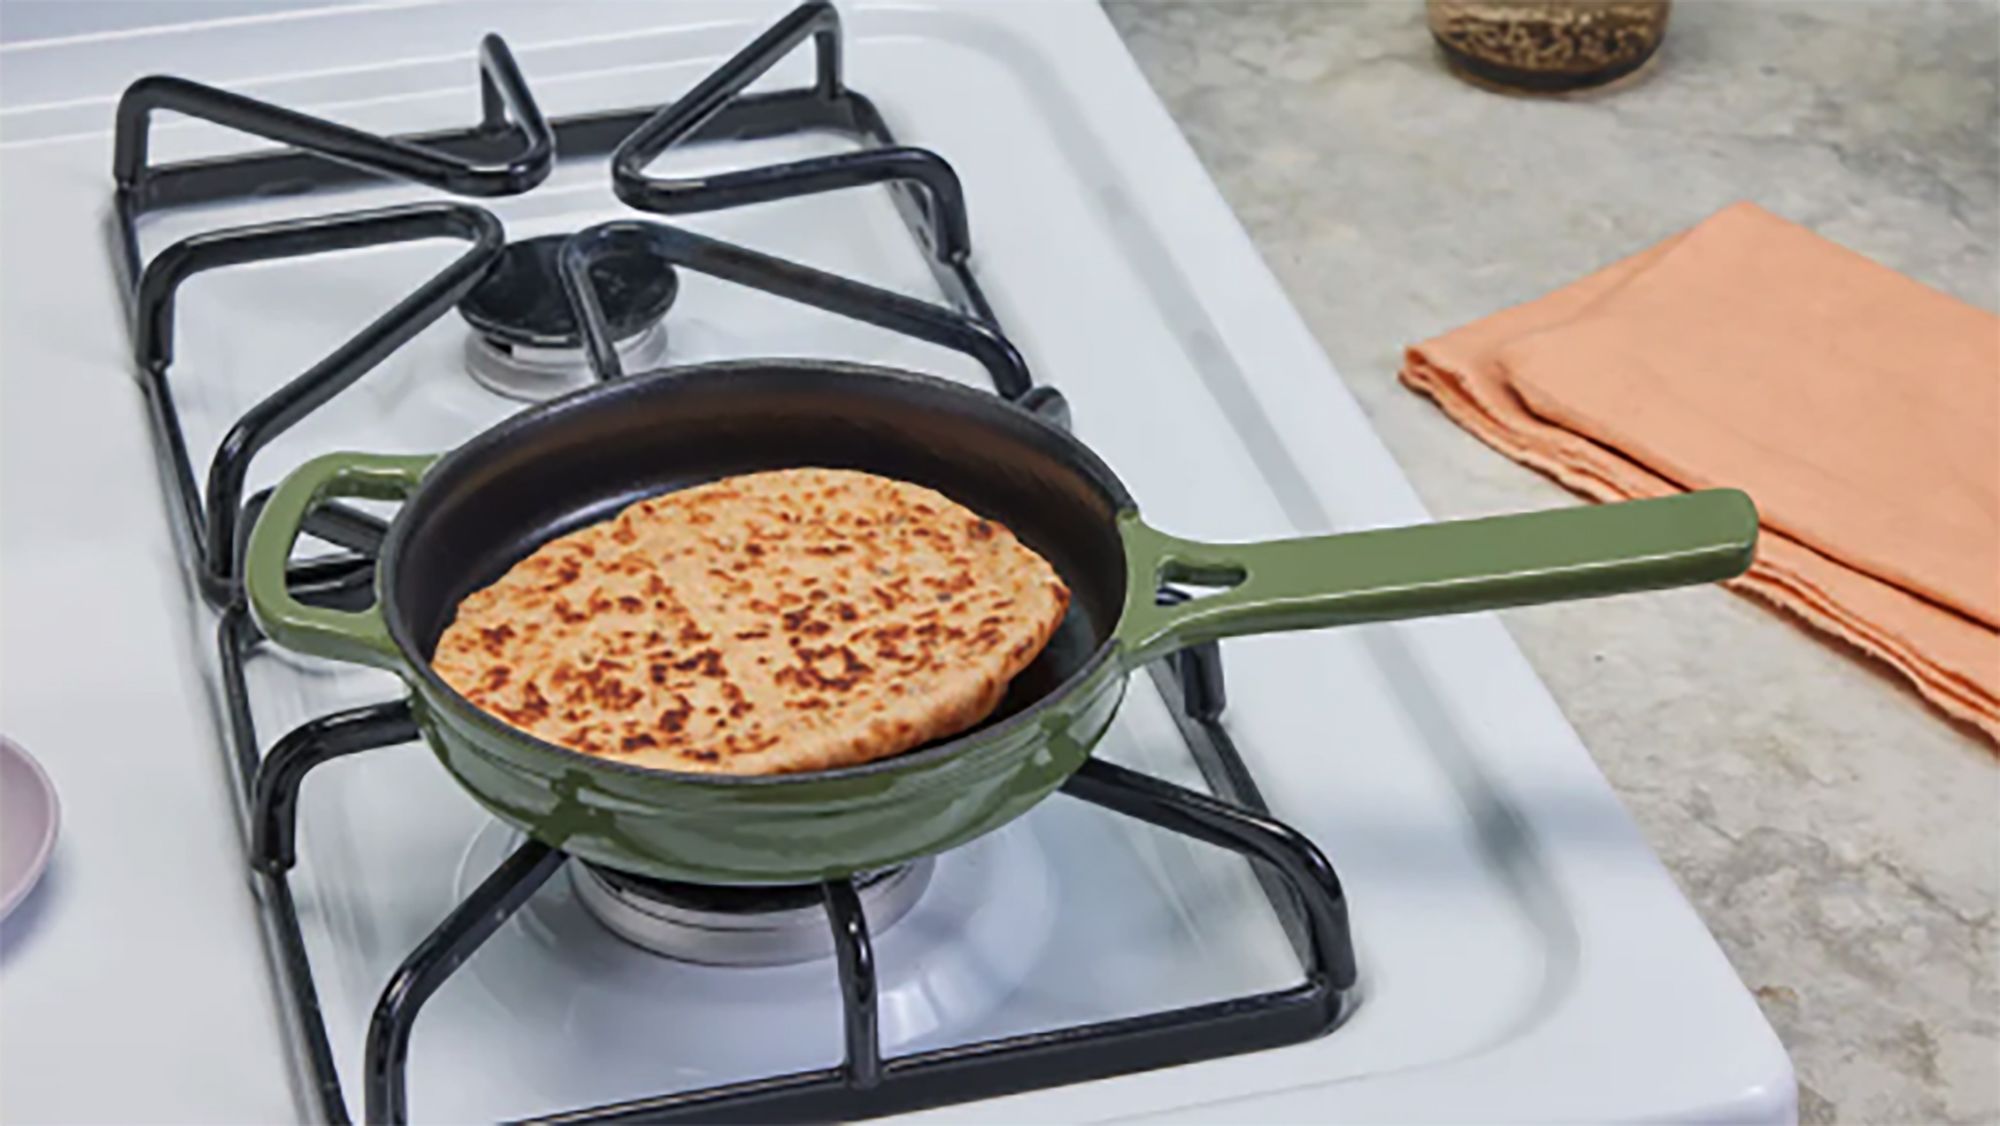 Our Place launches: Tiny Cast Iron Always Pan, Fearless Fry and